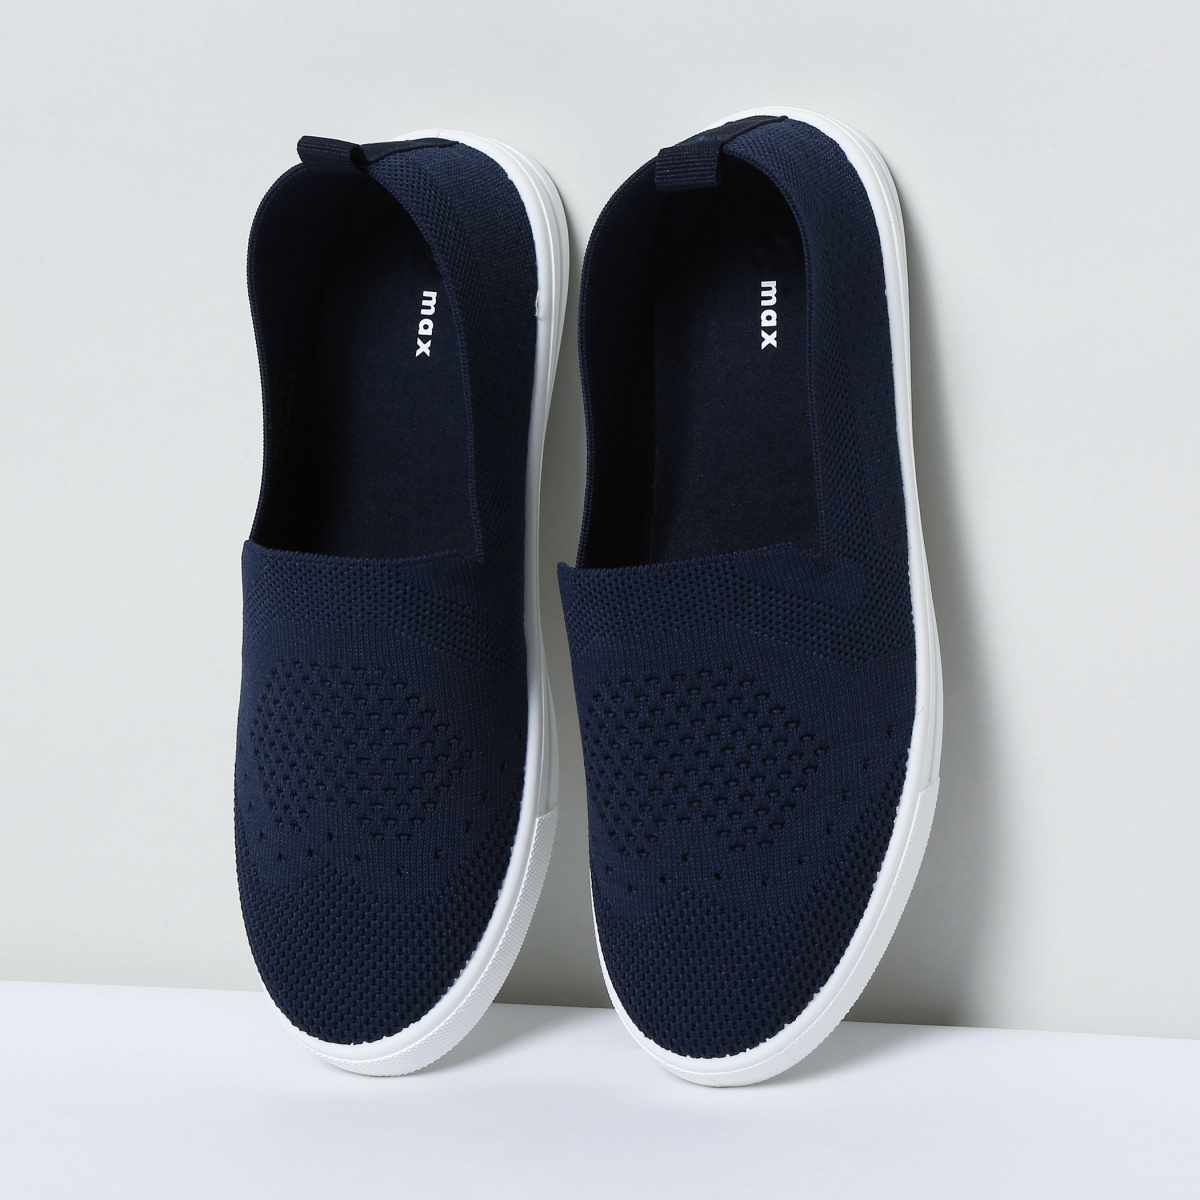 MAX Slip-On Shoes with Mesh Upper